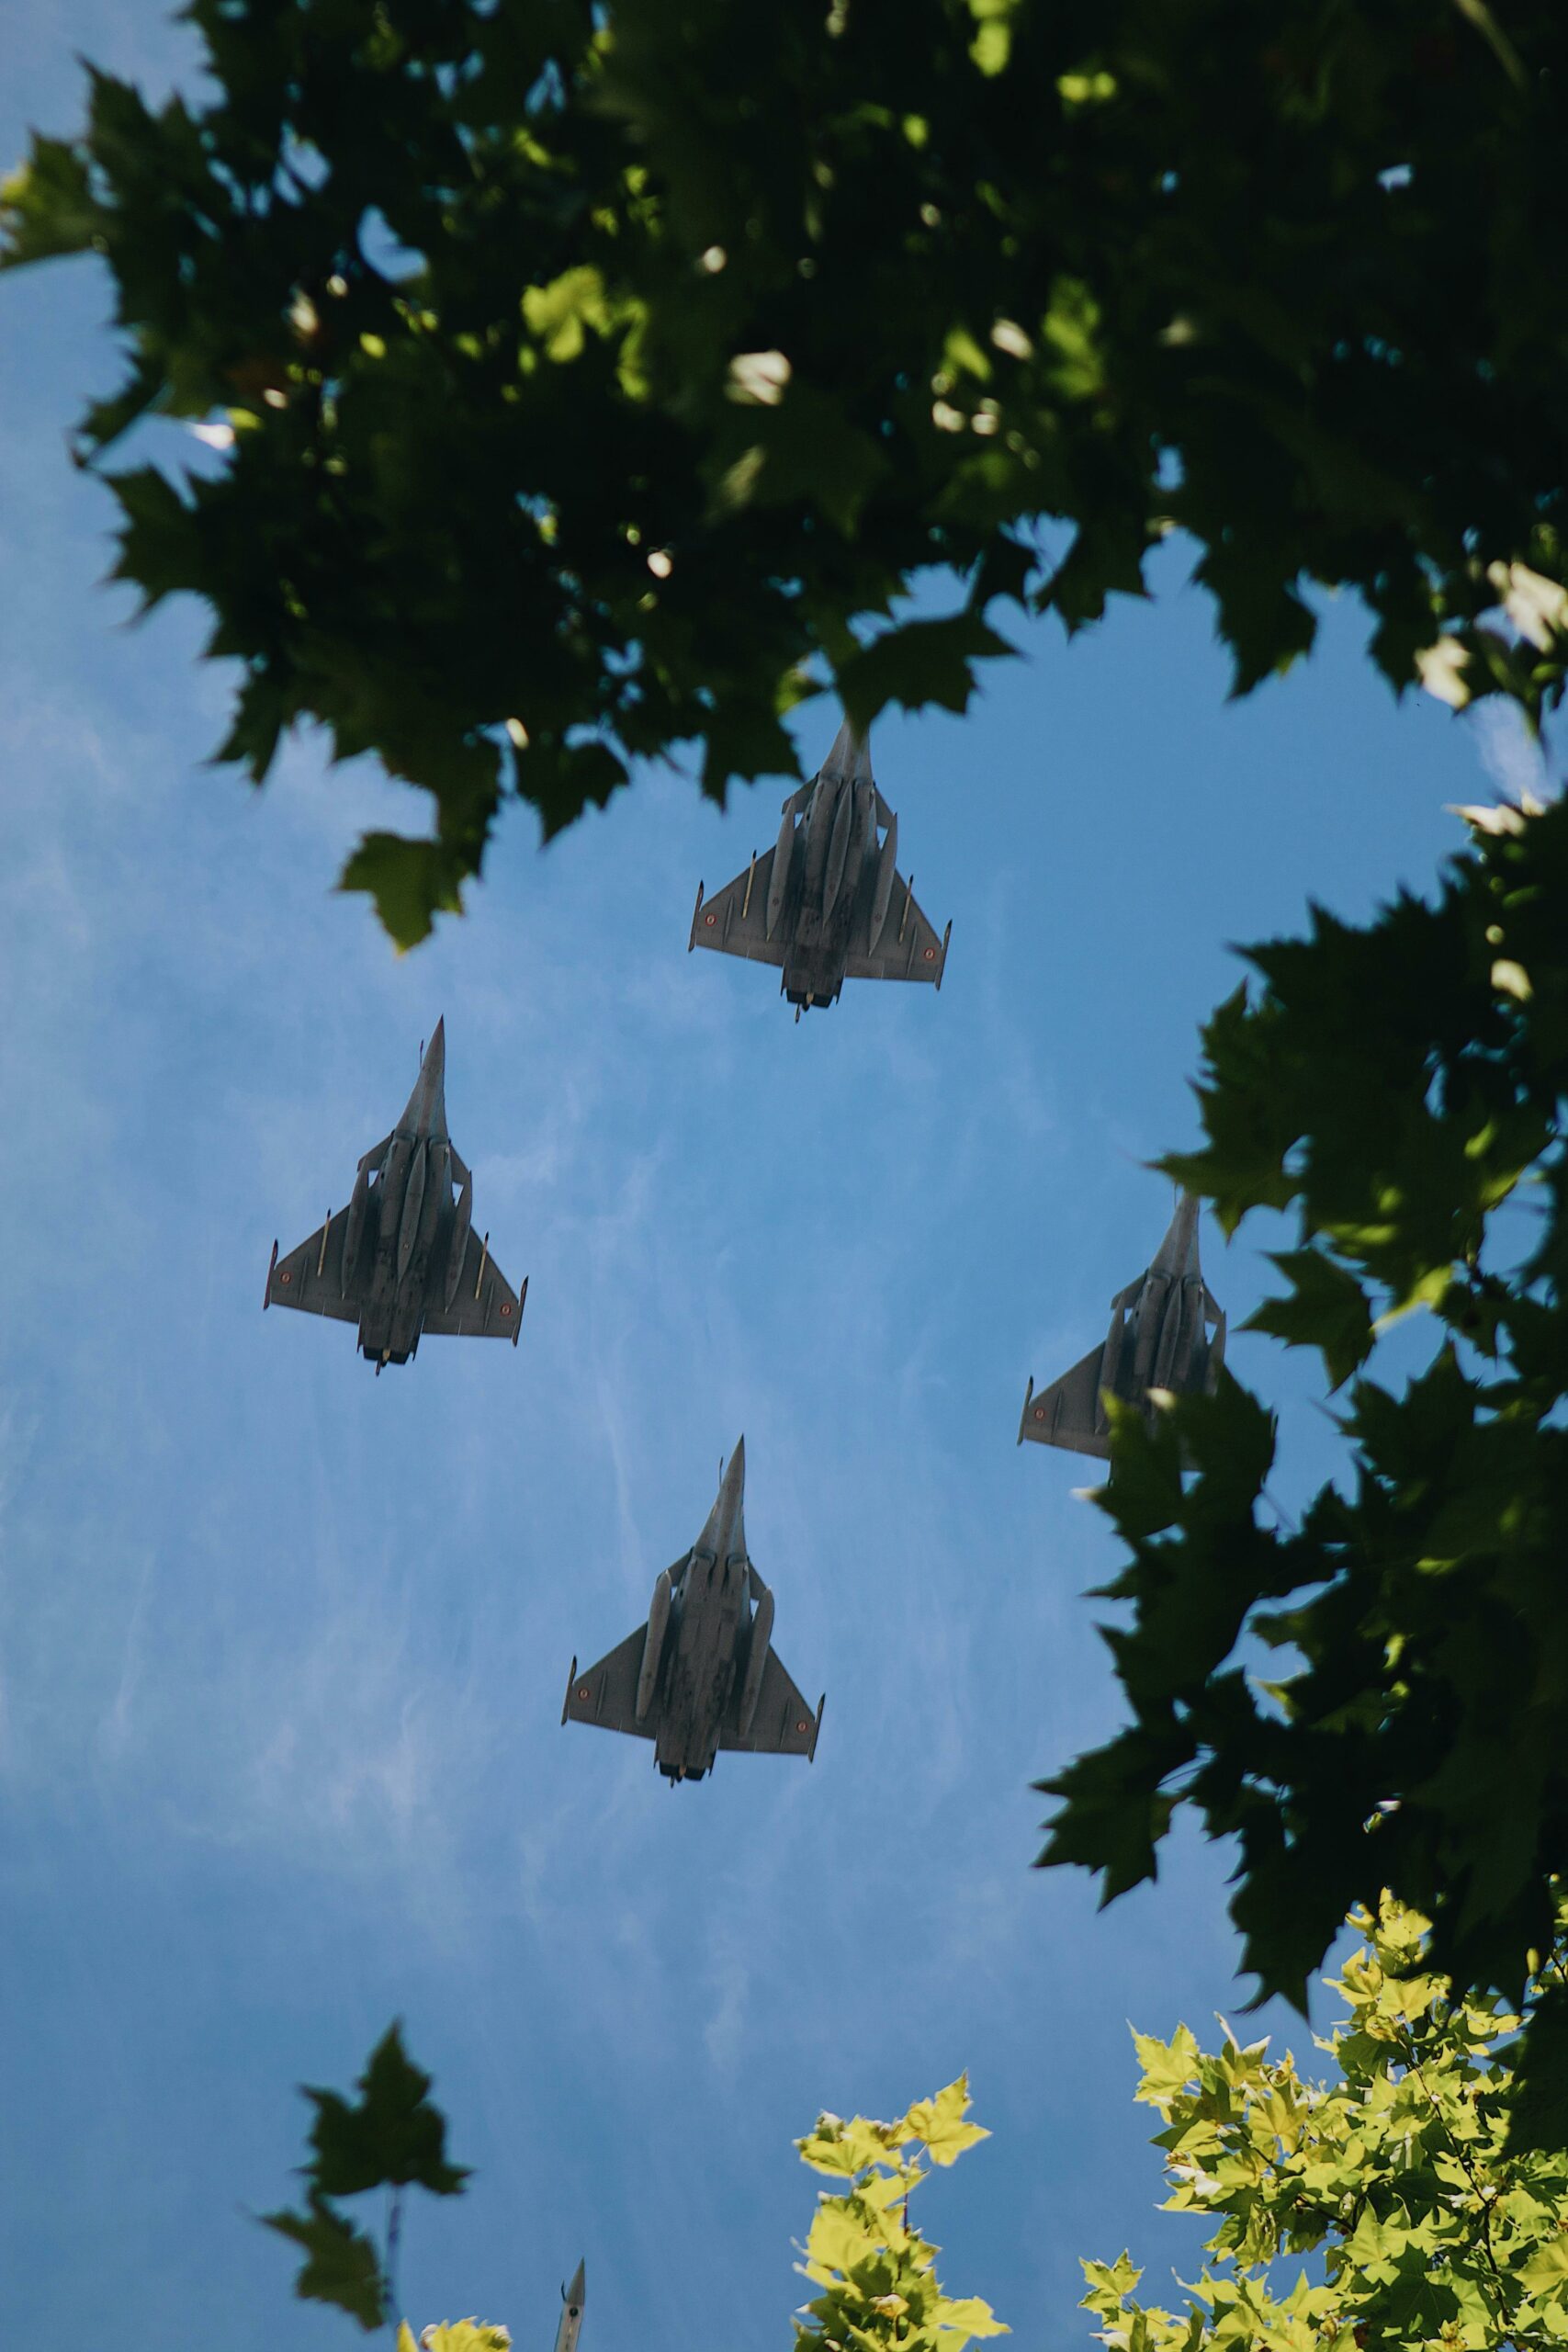 Airforce planes in the sky with foliage surrounding the picture